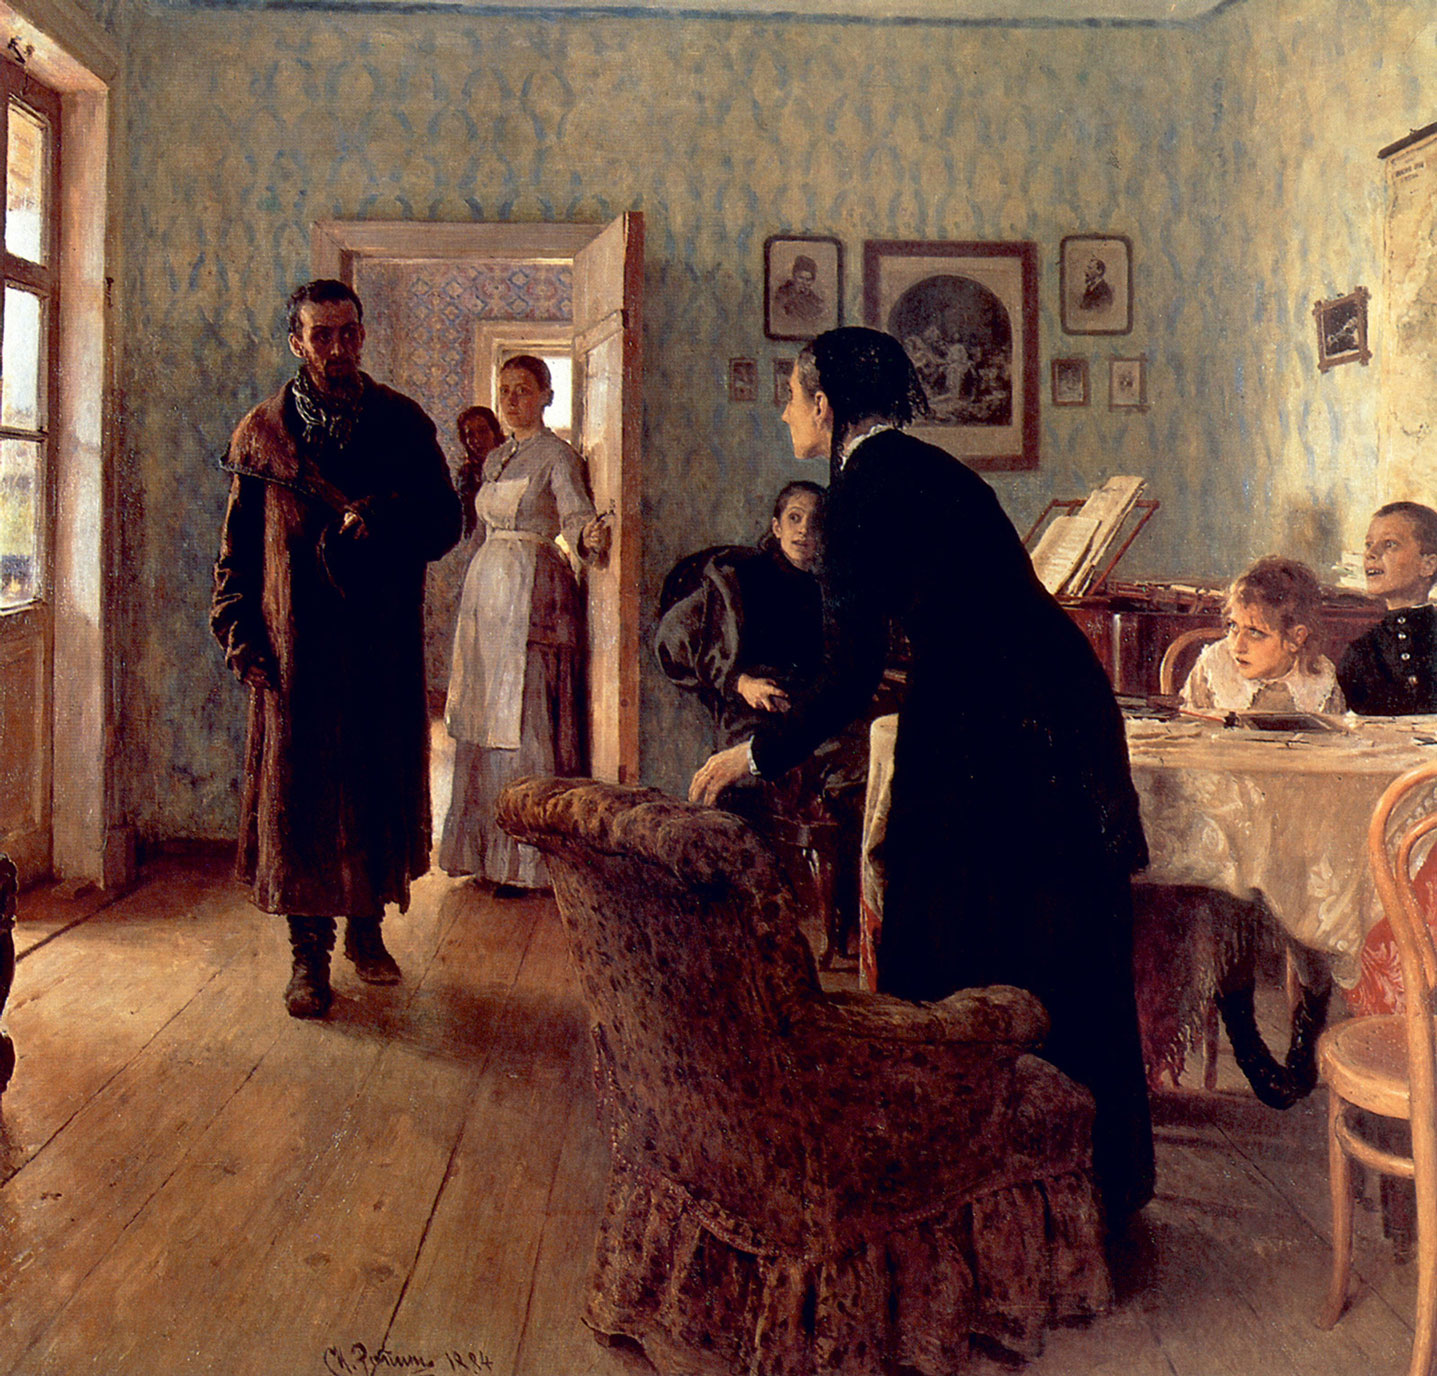 Ilya Repin, An Unexpected Visitor, 1884.
  
  
  
  
  
  
  
  
  
  following: Maps of the eye movements of a single subject asked by Yarbus to 1) examine the painting freely, 2) estimate the material circumstances of the family, 3) assess the ages of the characters, 4) determine the activities of the family prior to the visitor’s arrival, 5) remember the characters’ clothes, and 6) surmise how long the “unexpected visitor” had been away. All maps are from Yarbus’s book Eye Movements and Vision.Caveat lector! Yarbus’s original text simply juxtaposes the painting and the maps of the subject’s eye movements. The superimpositions offered here are our attempt to make the results of Yarbus’s study more vivid for you, our dear reader. However, the precise alignments between the painting and the eye movements were not always apparent in every case. These images are our best approximation. 
   